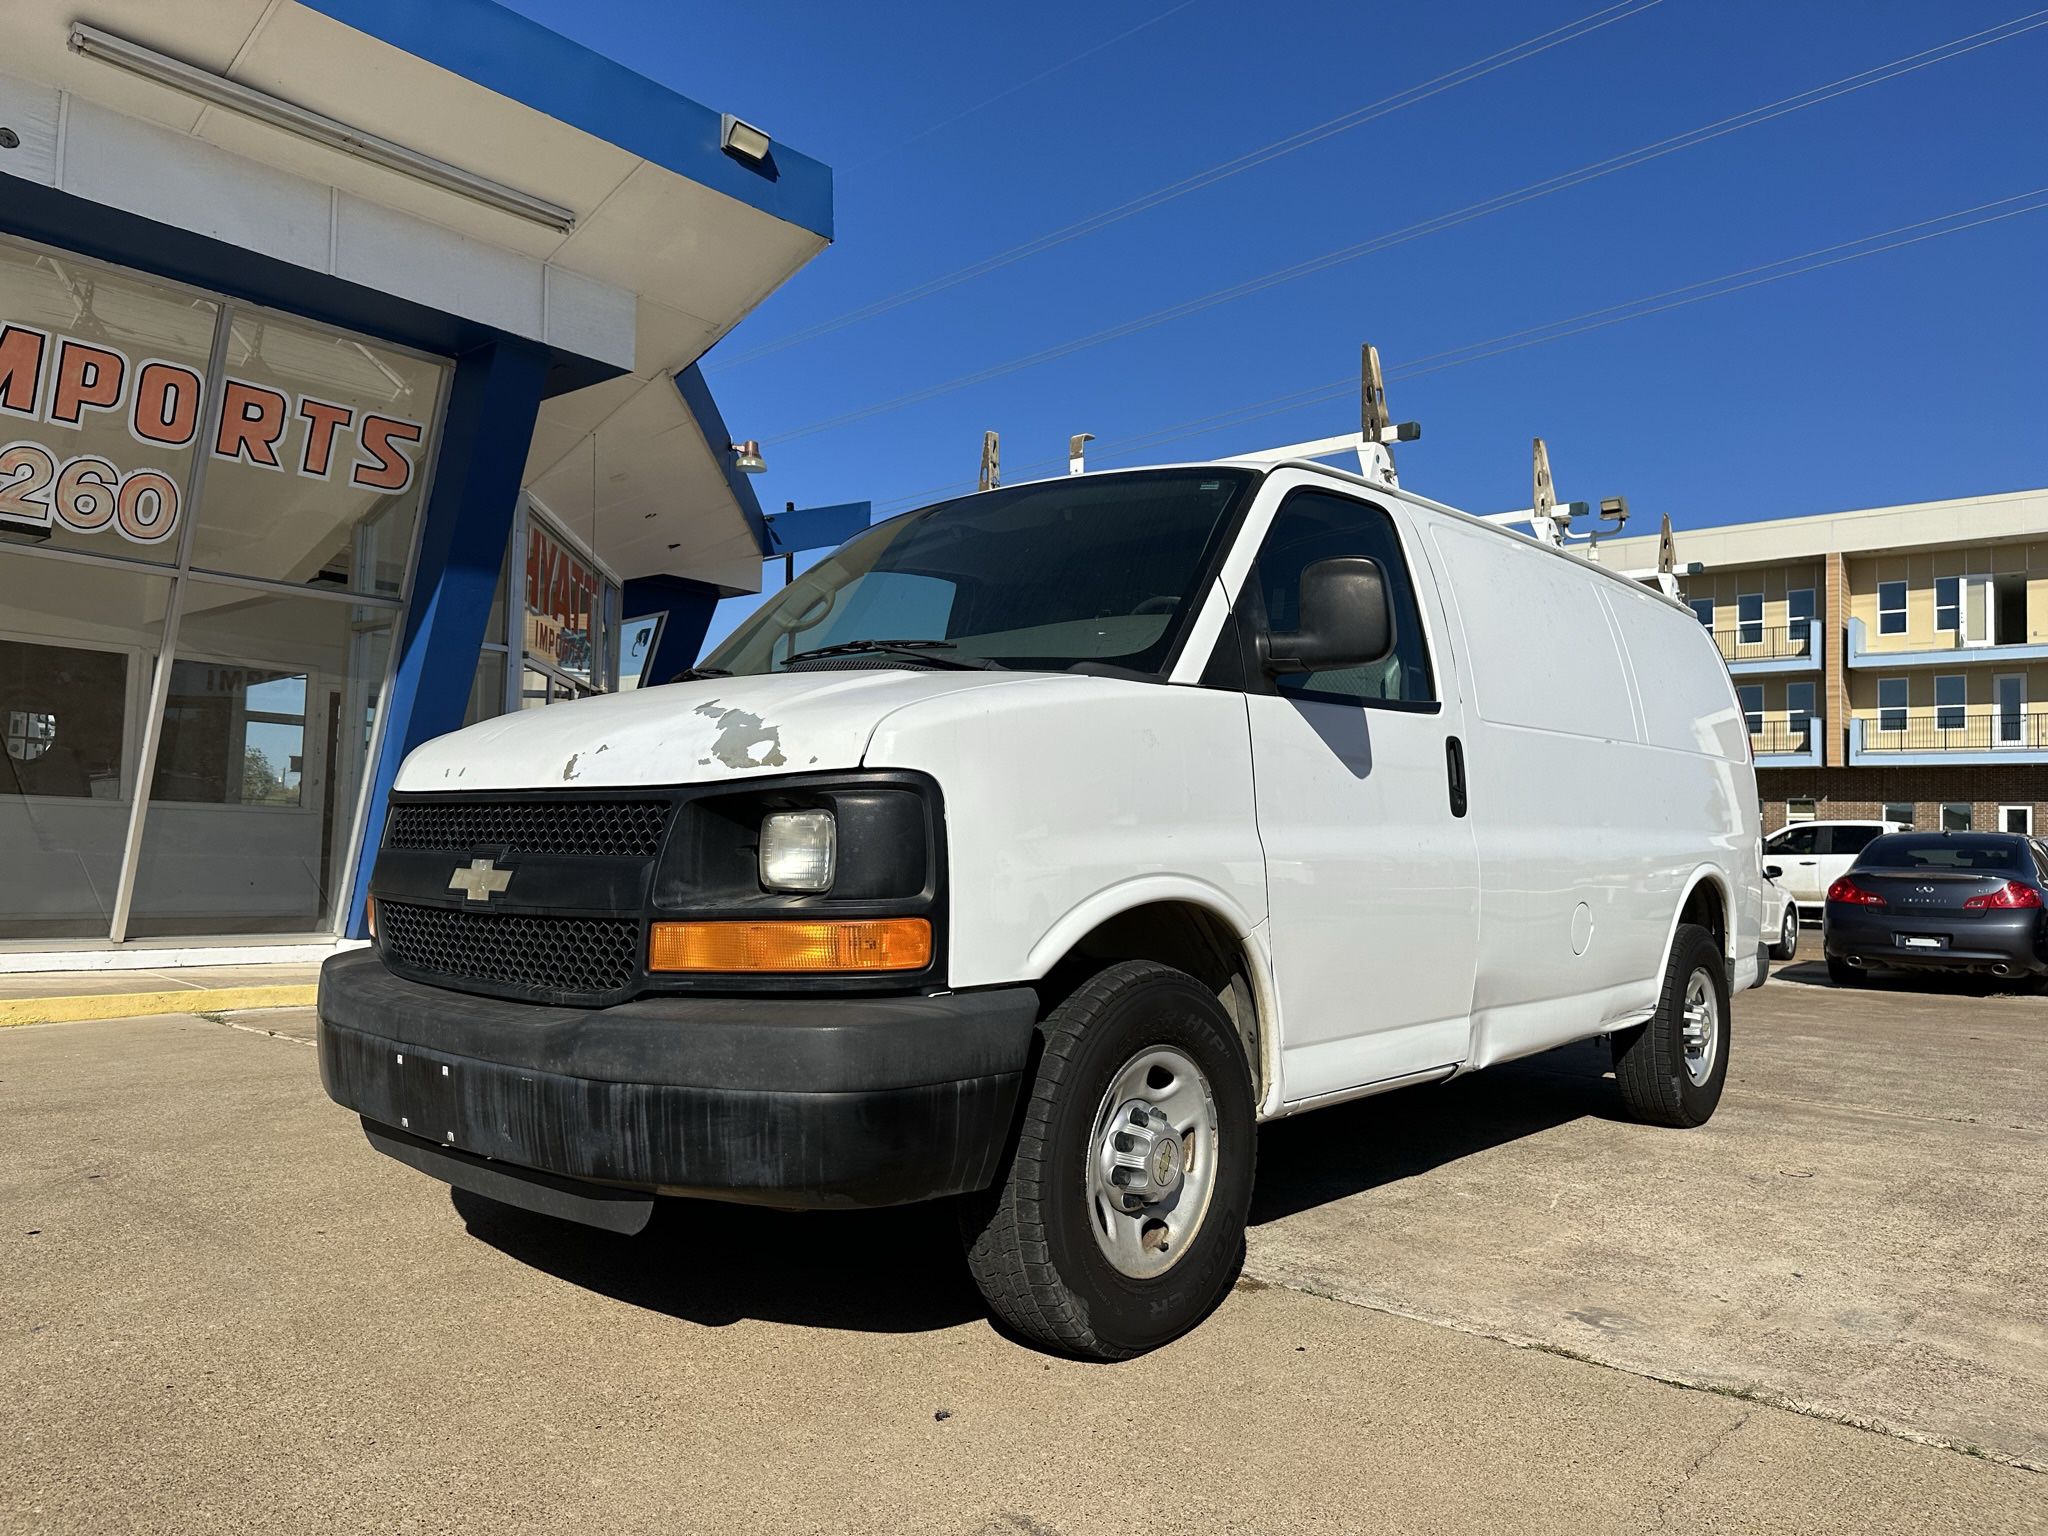 2012 Chevy Express 2500 